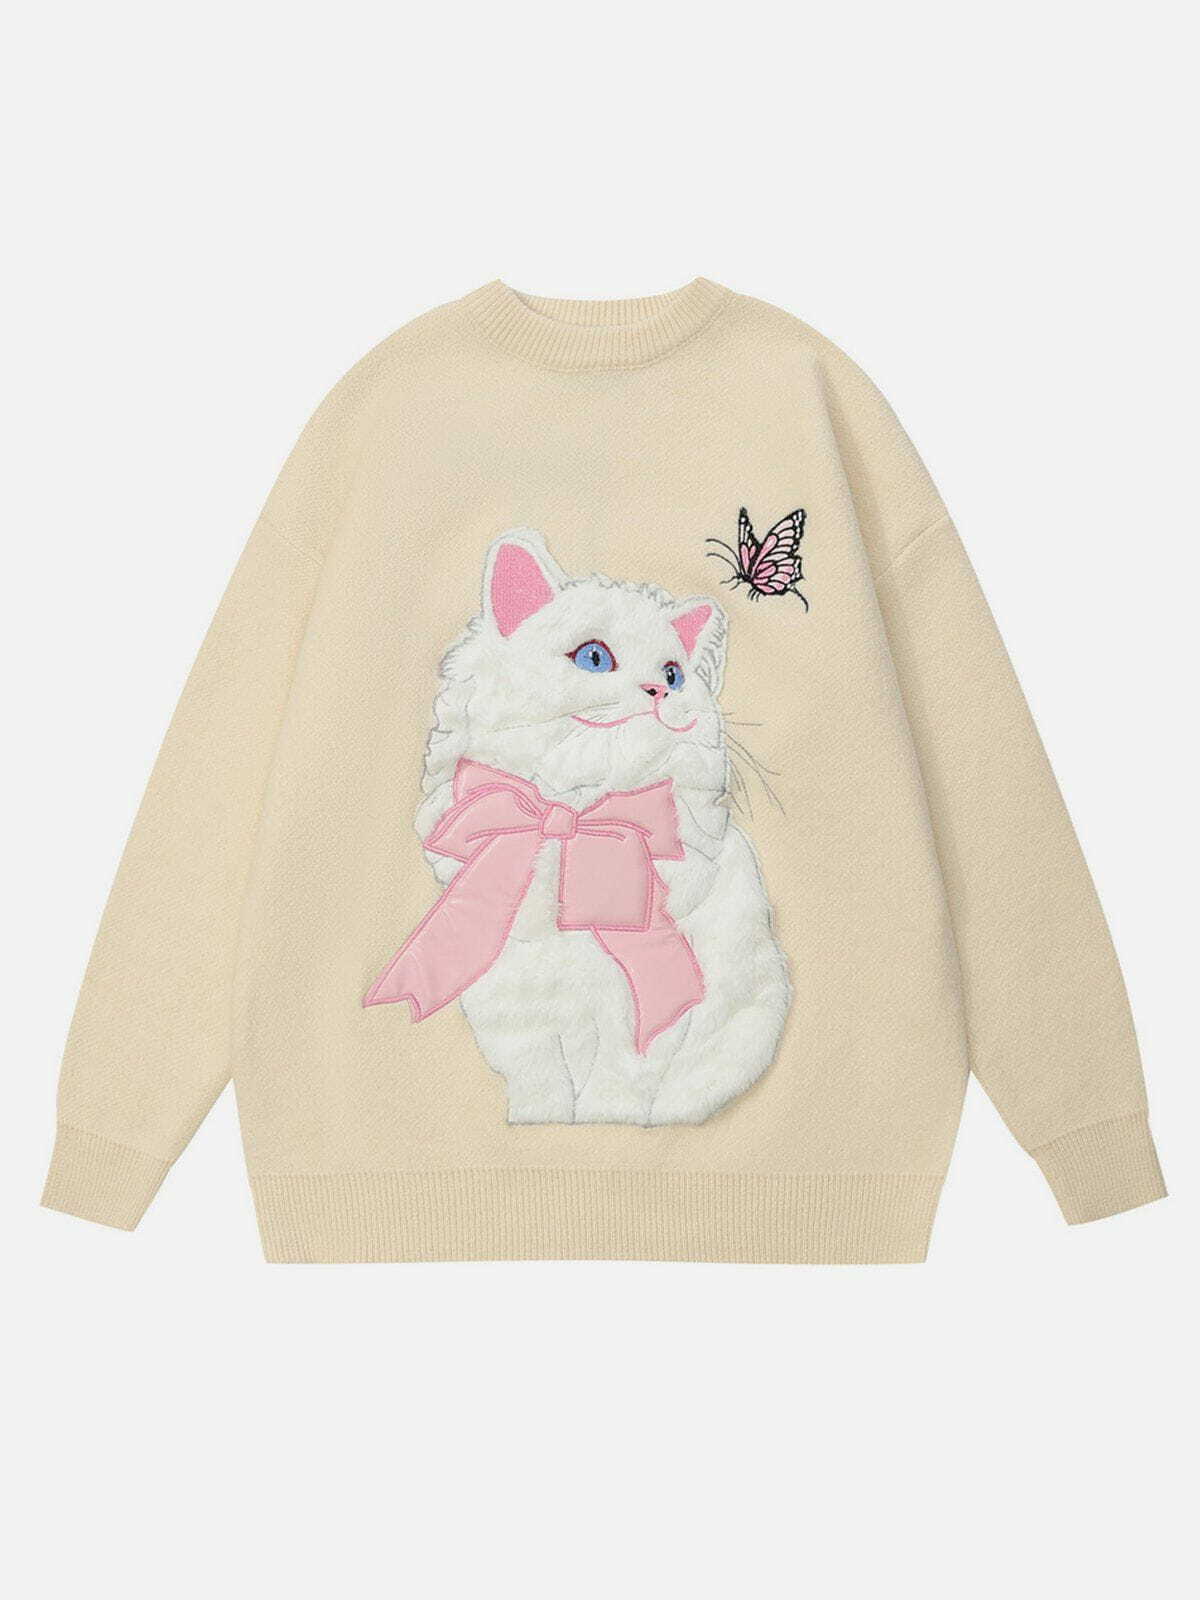 chic cat embroidery sweater youthful & trendy appeal 7042